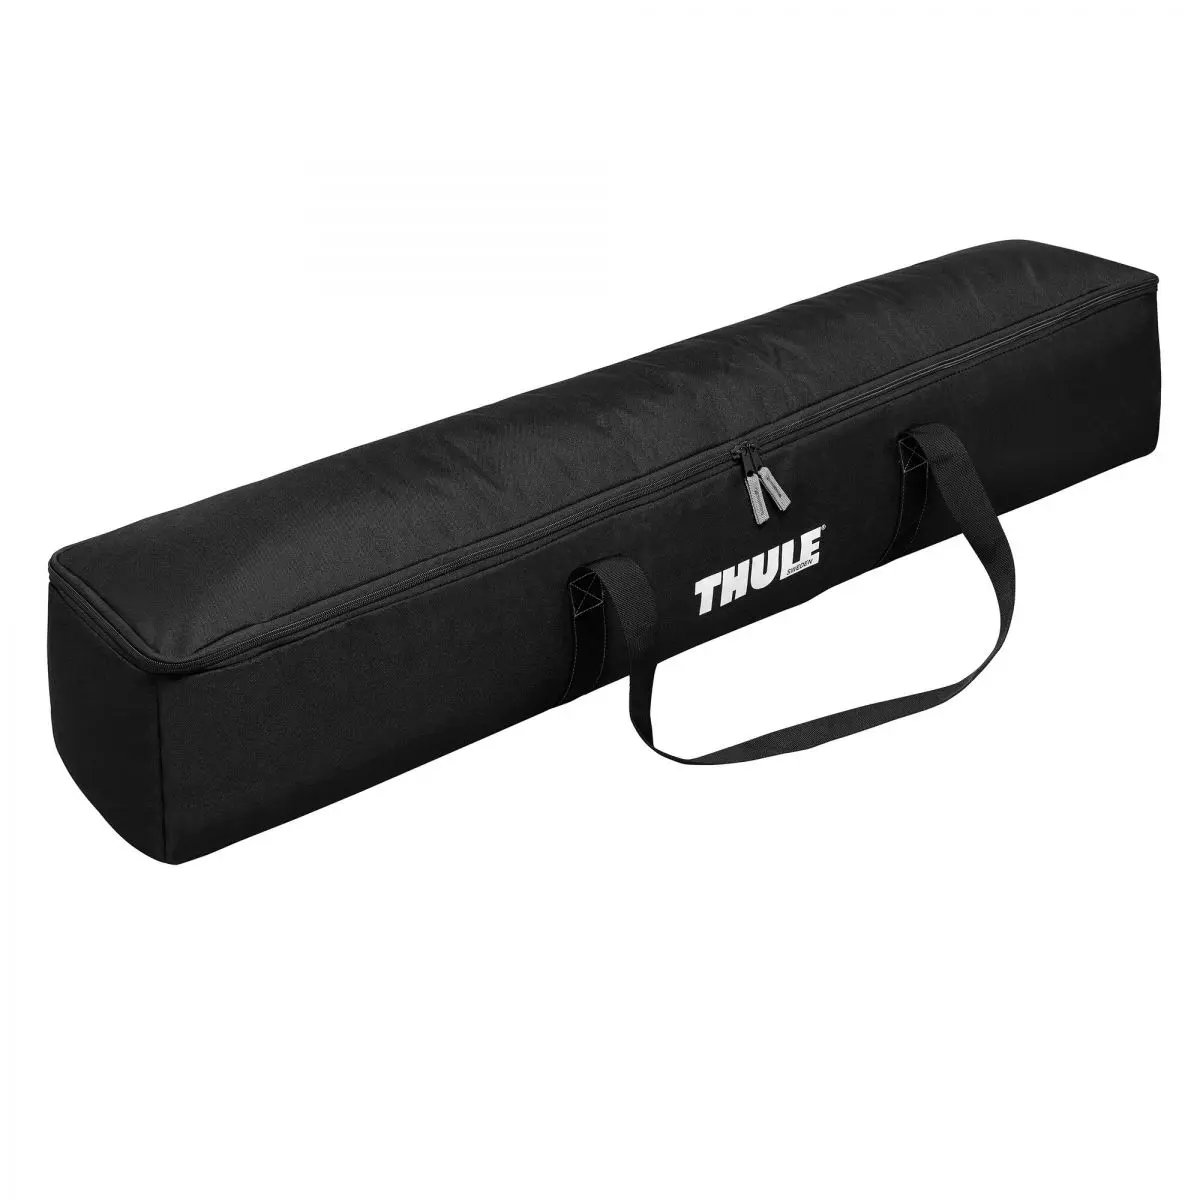 Thule Panorama pentru TO 9200, lungime 4,5 m, inaltime L